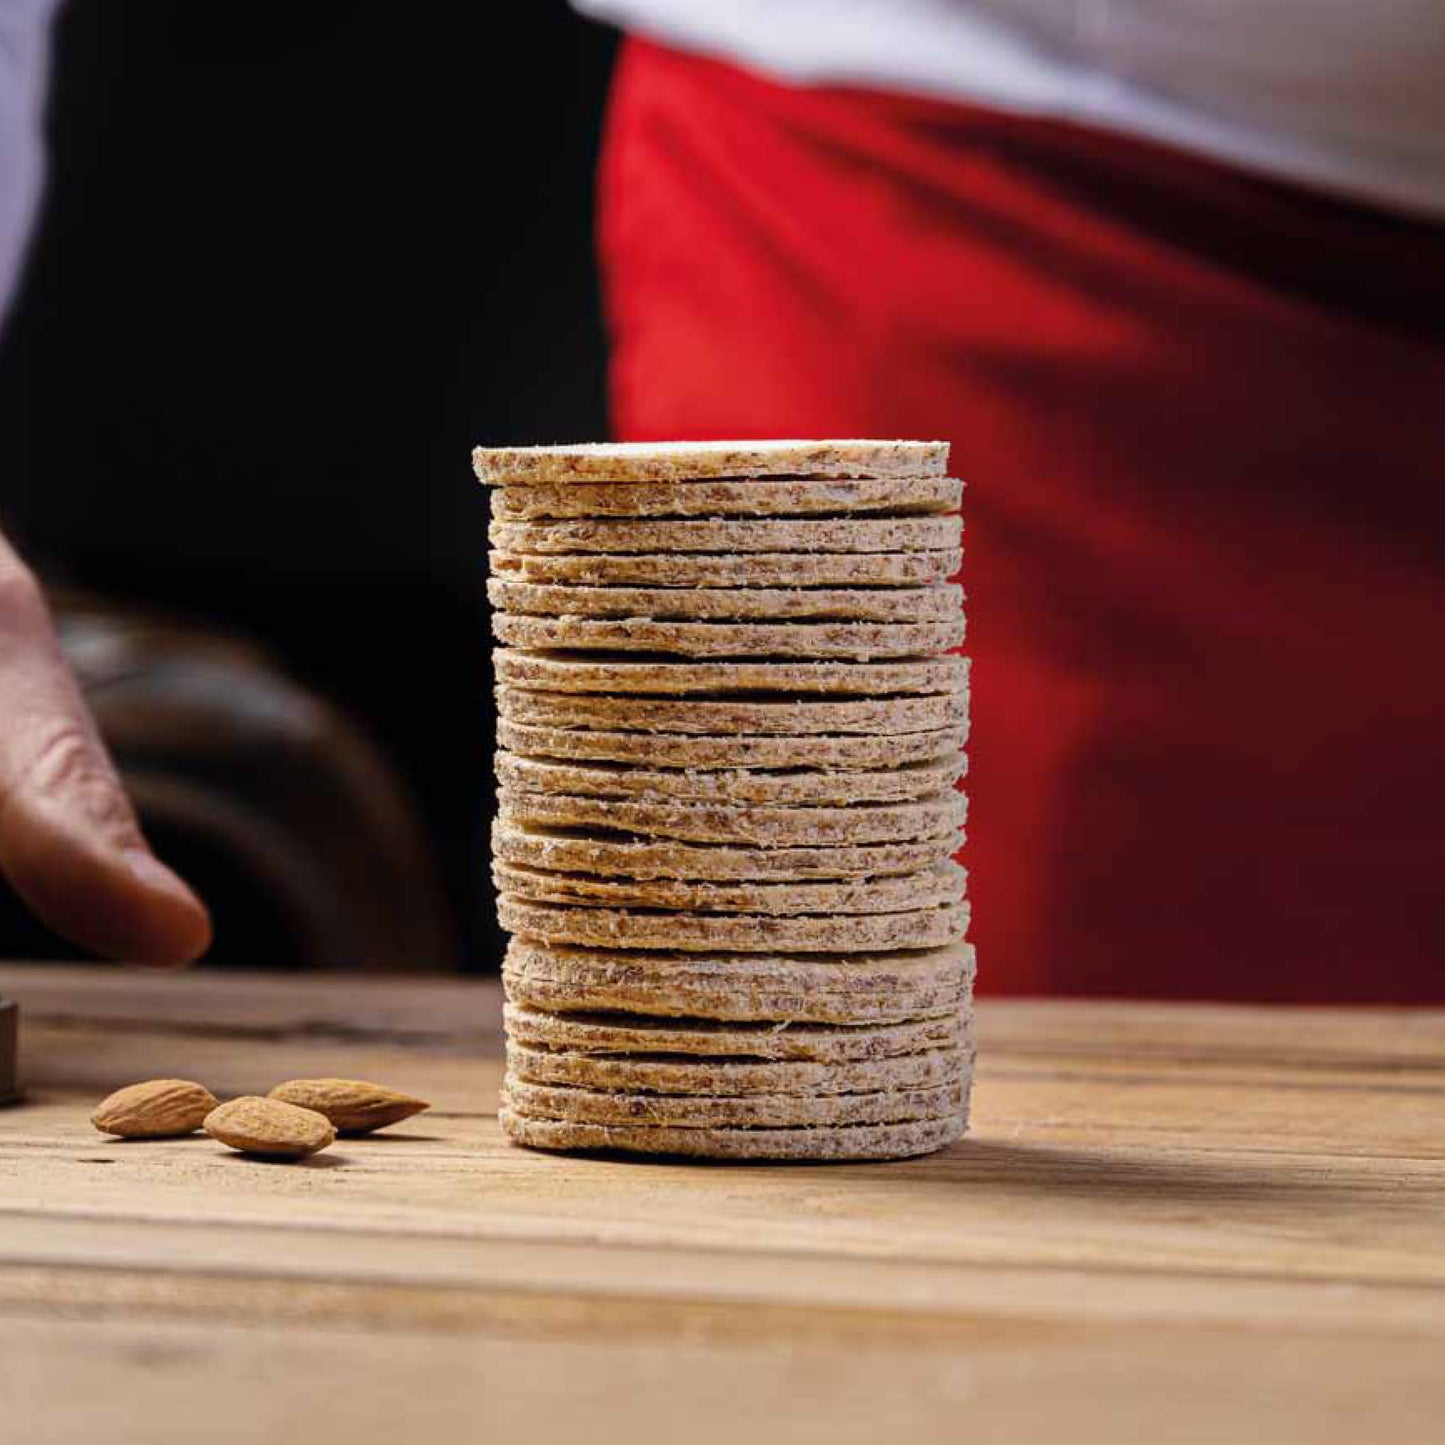 Cialde di Montecatini "The Traditional Natural Wafer with Almonds Since 1911"